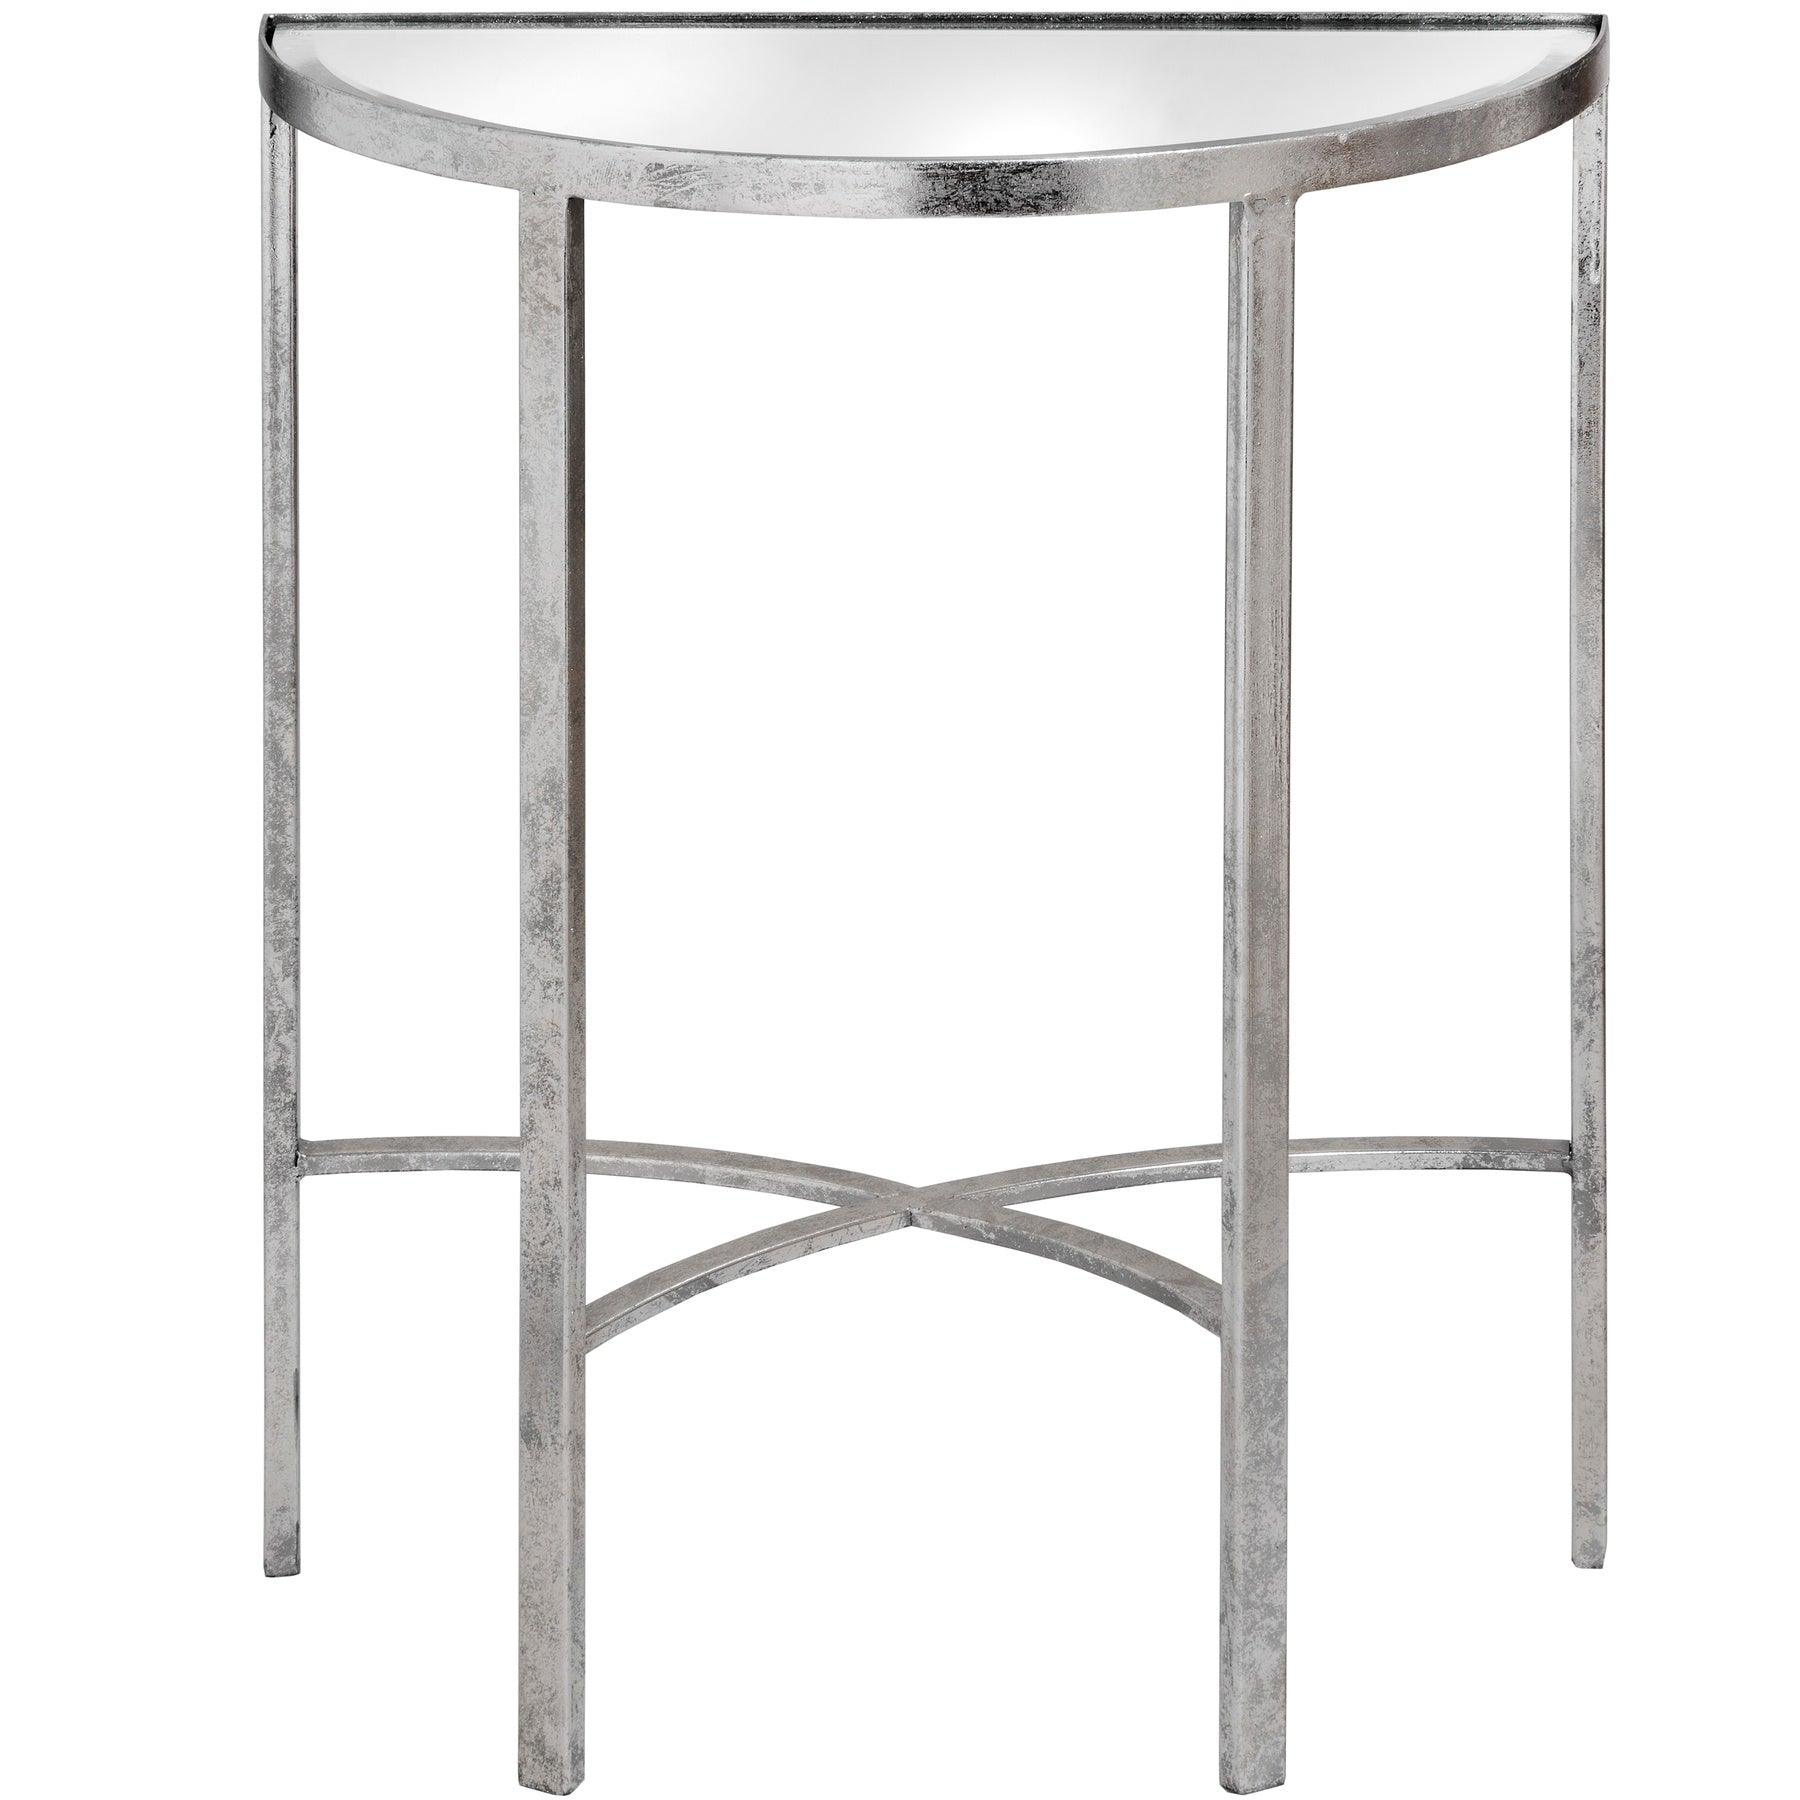 View Mirrored Silver Half Moon Table With Cross Detail information